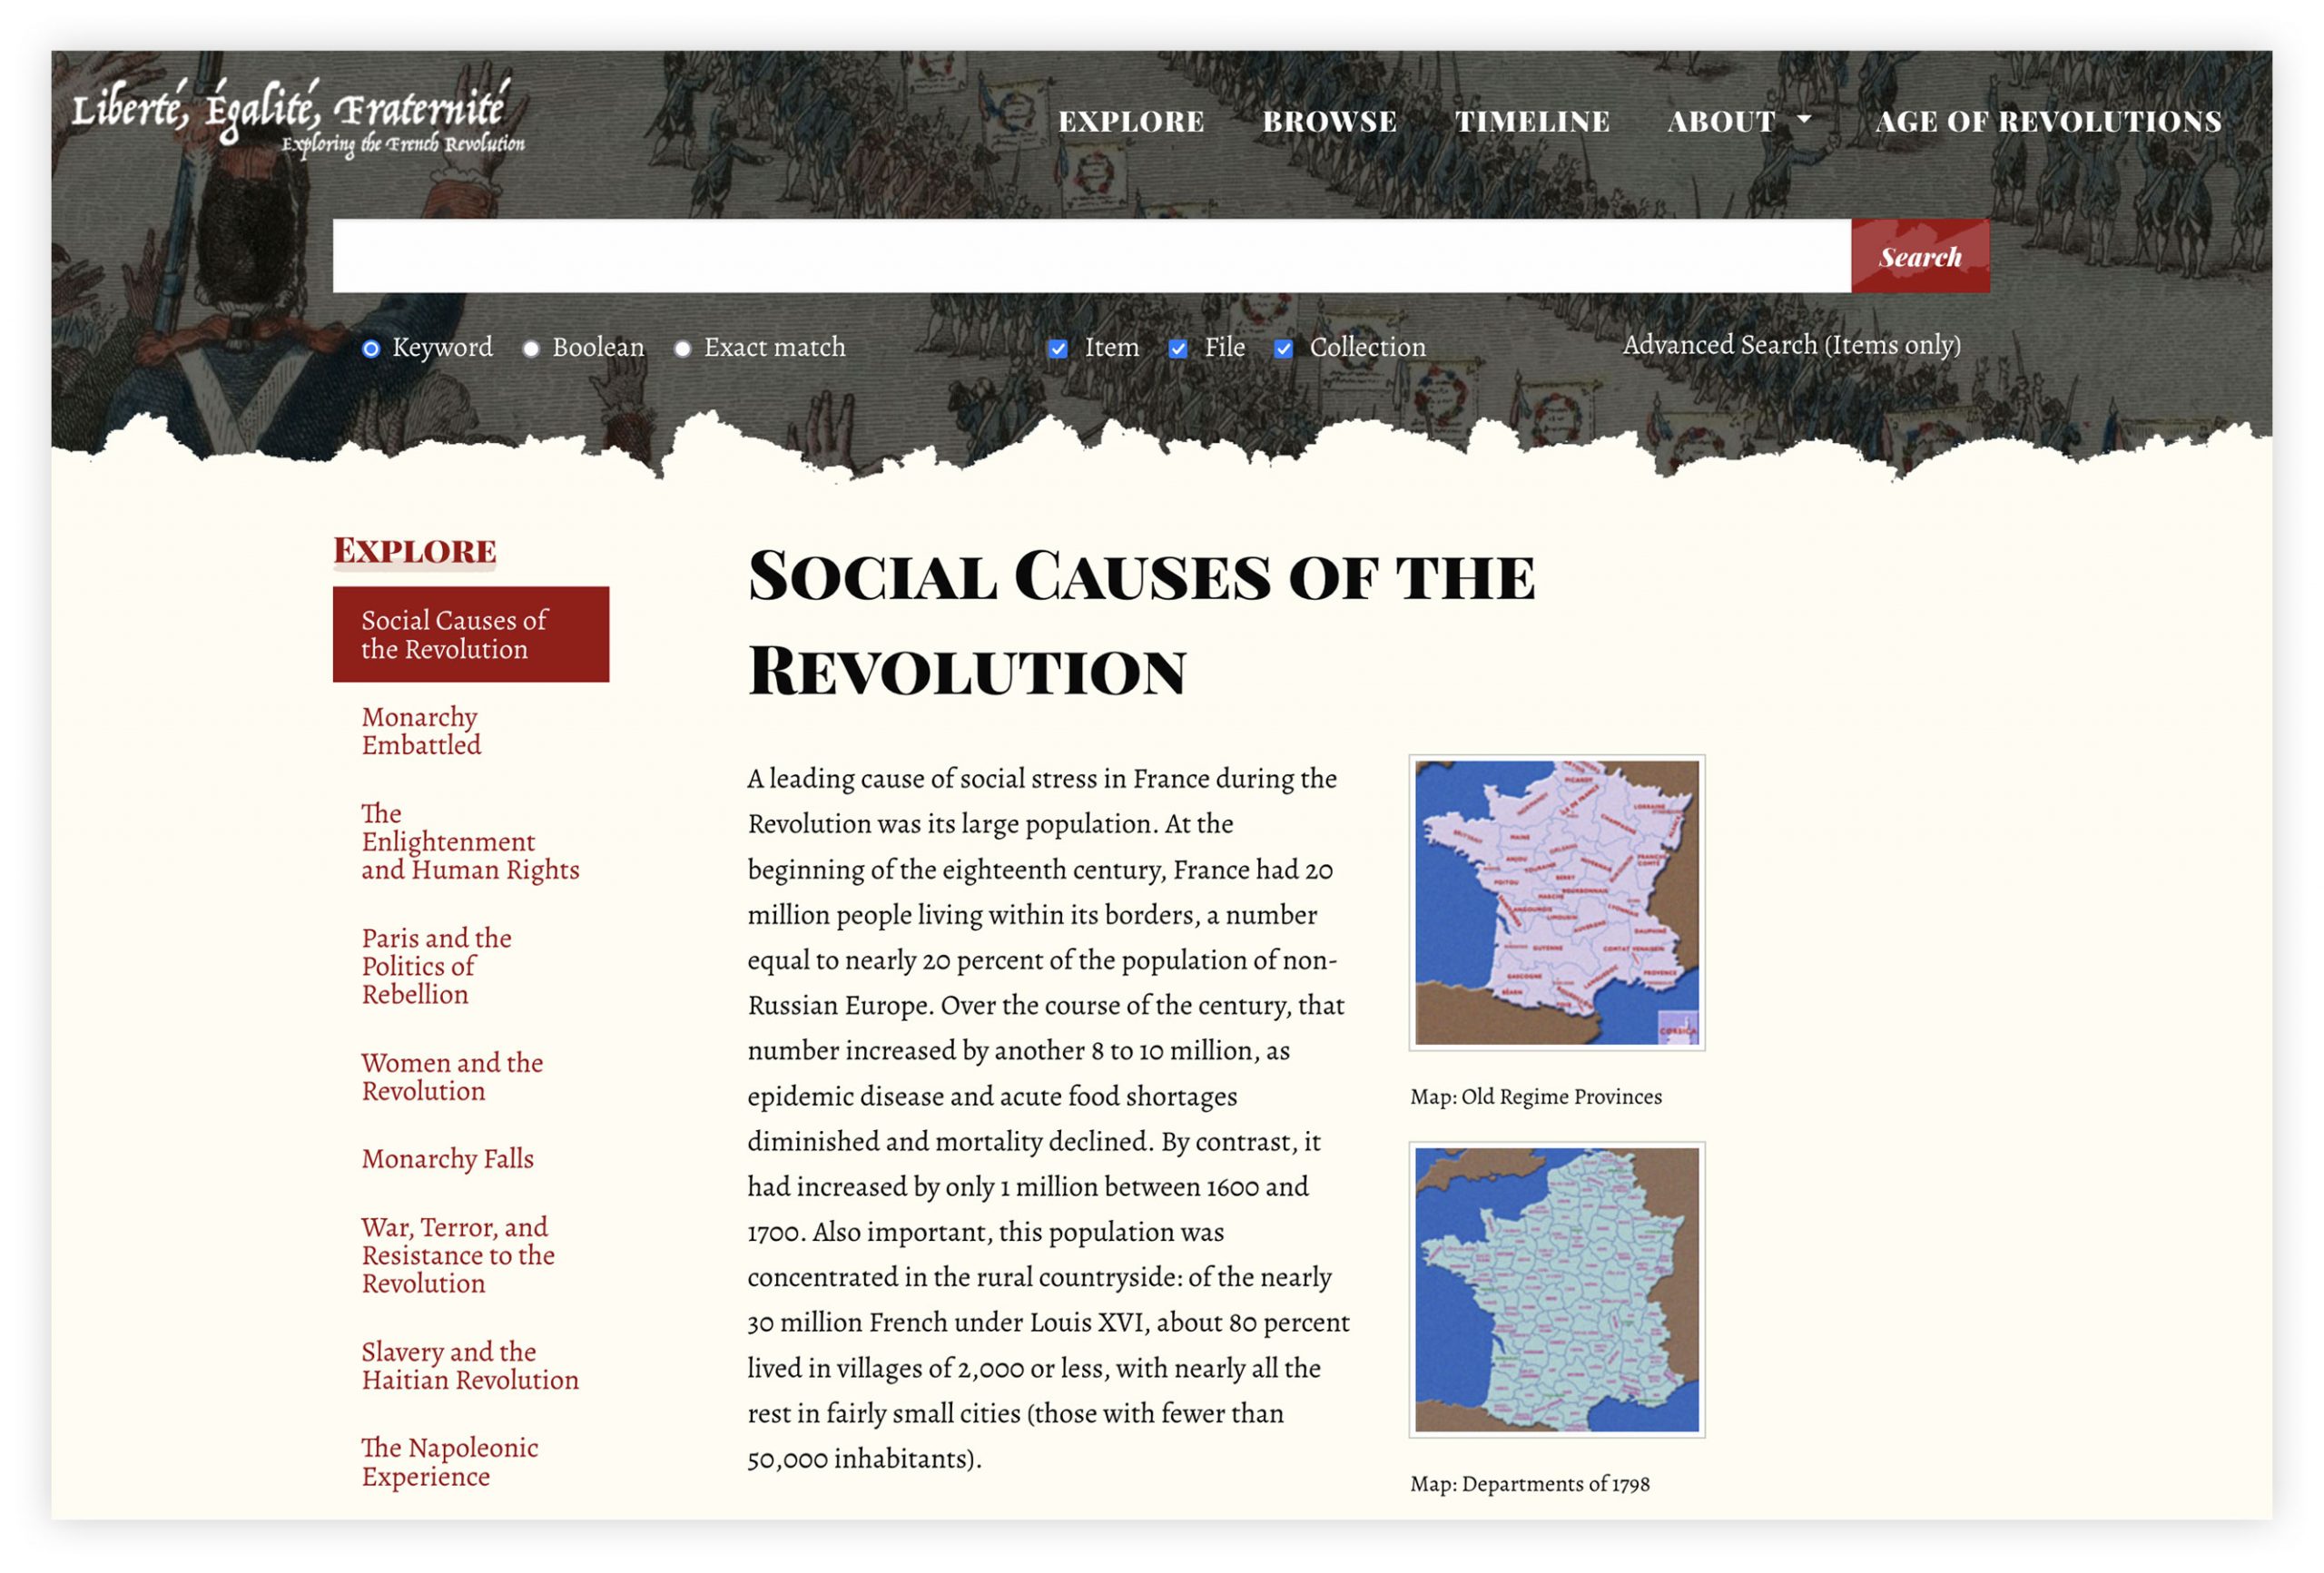 Screengrab of a Liberte, Egalite, Fraternite website Explore page which reads, "Social Causes of the Revolution."